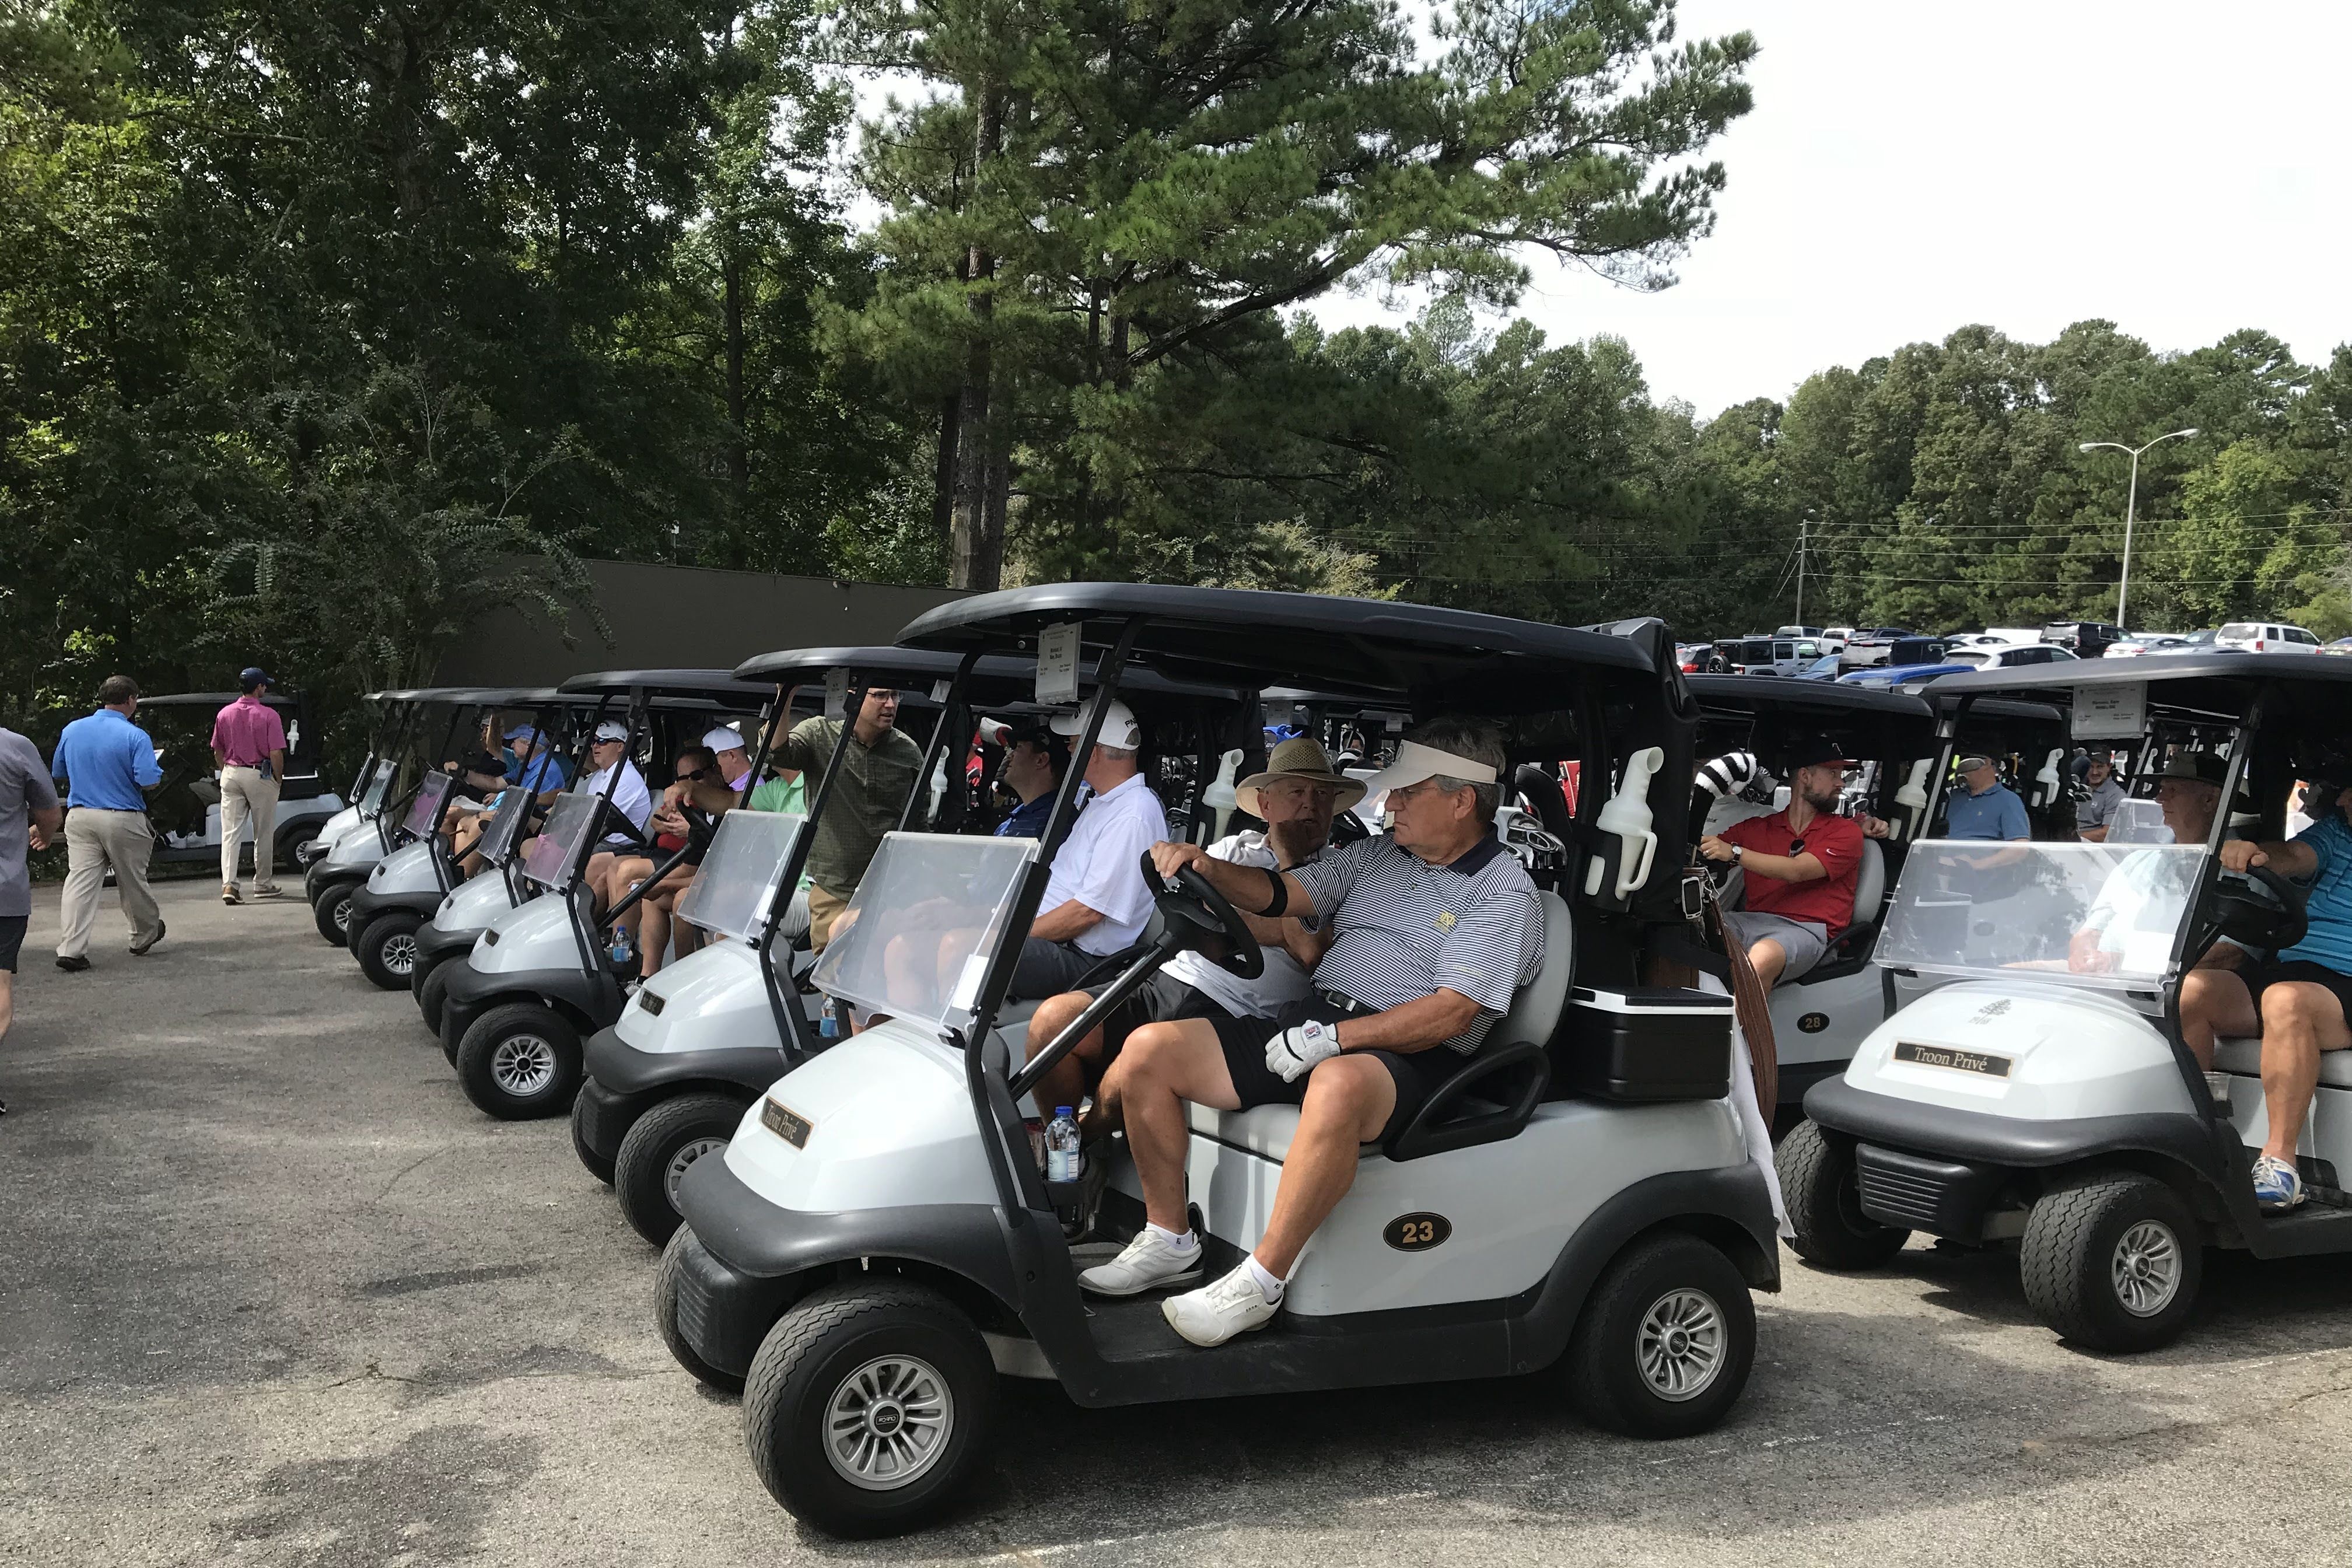 ACFS Sixth Annual Charity Golf Event